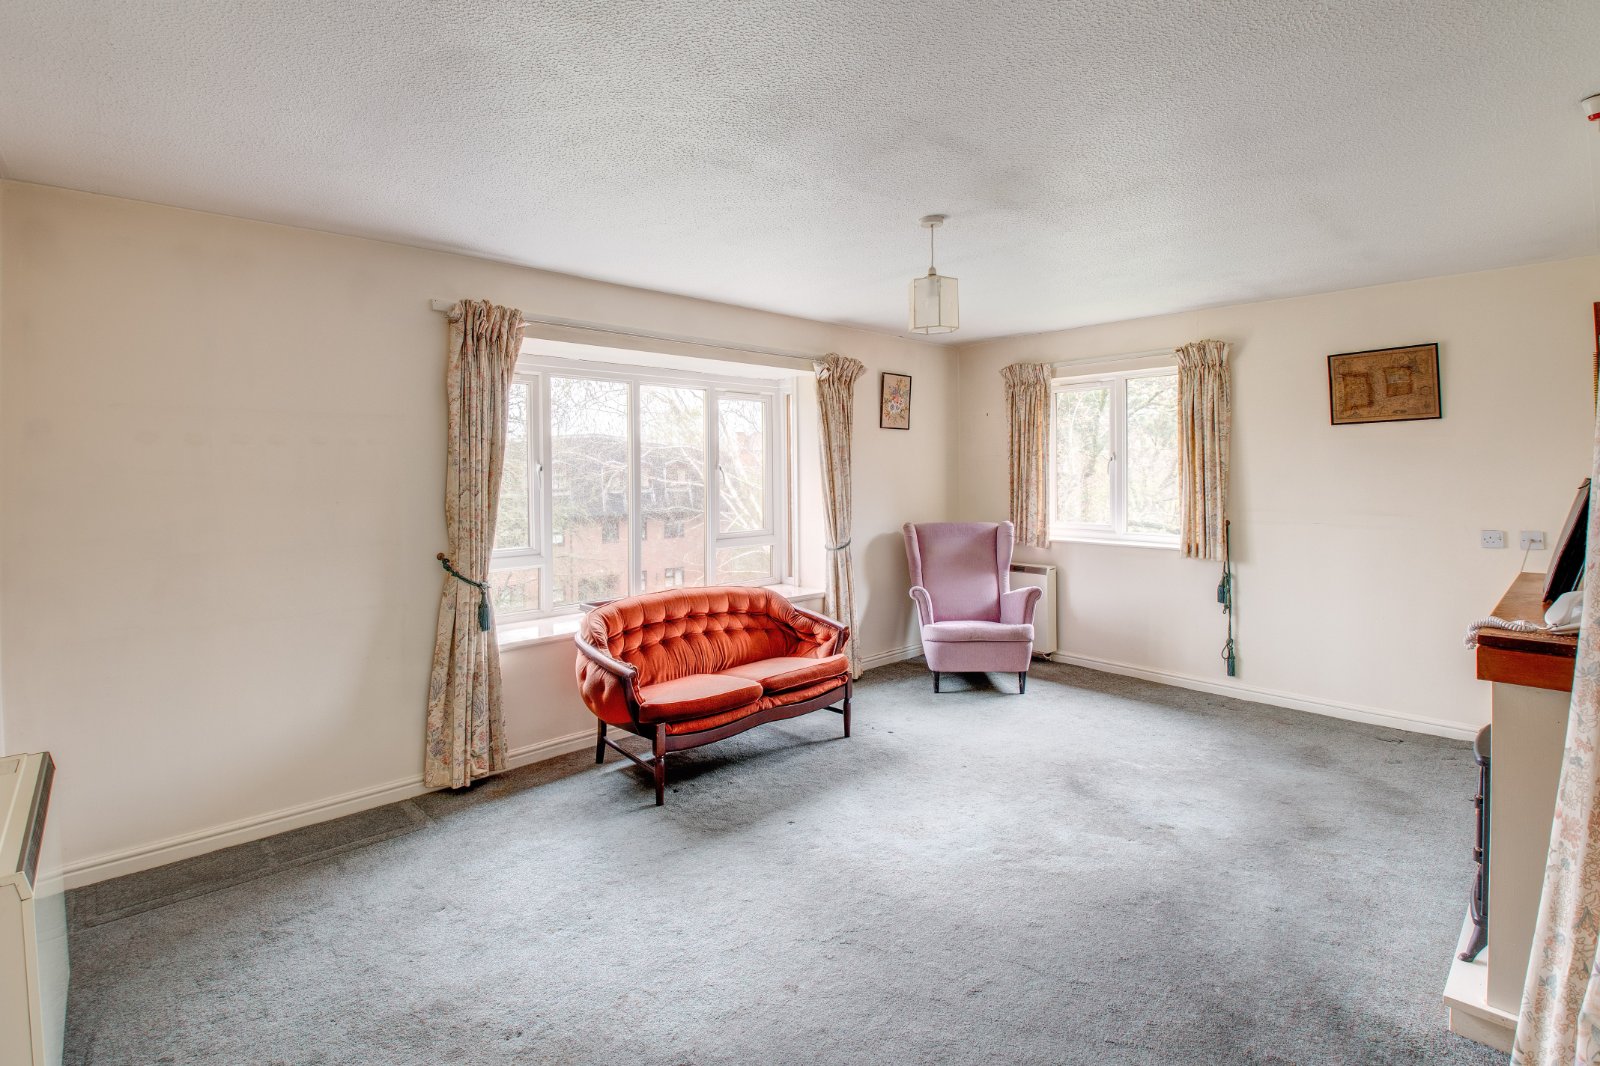 1 bed  for sale in Housman Park, Bromsgrove 5